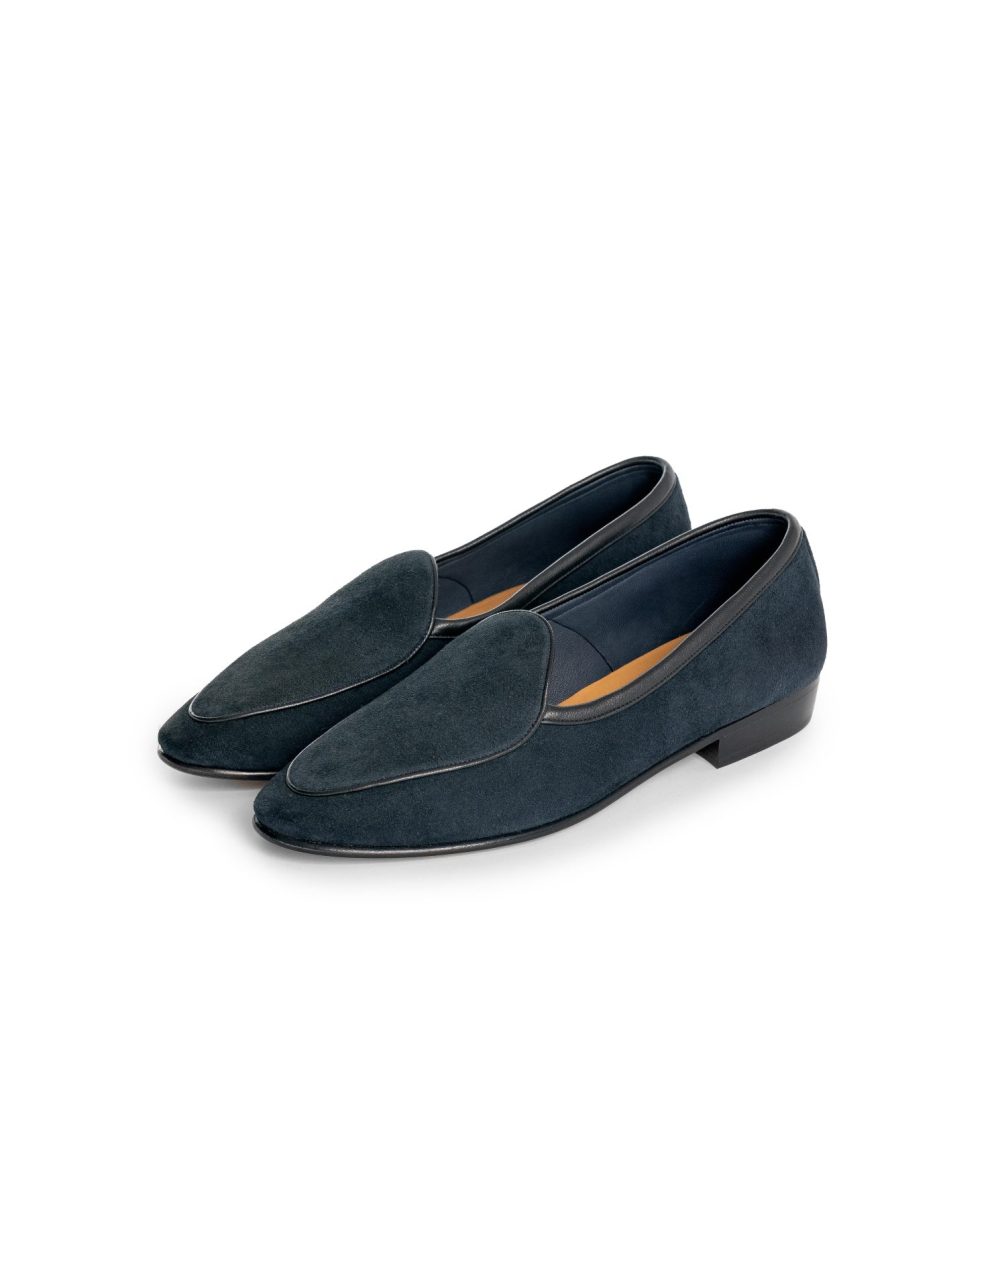 BAUDOIN&LANGE Sagan Classic Plain Loafers Midnight Navy Suede - The ...